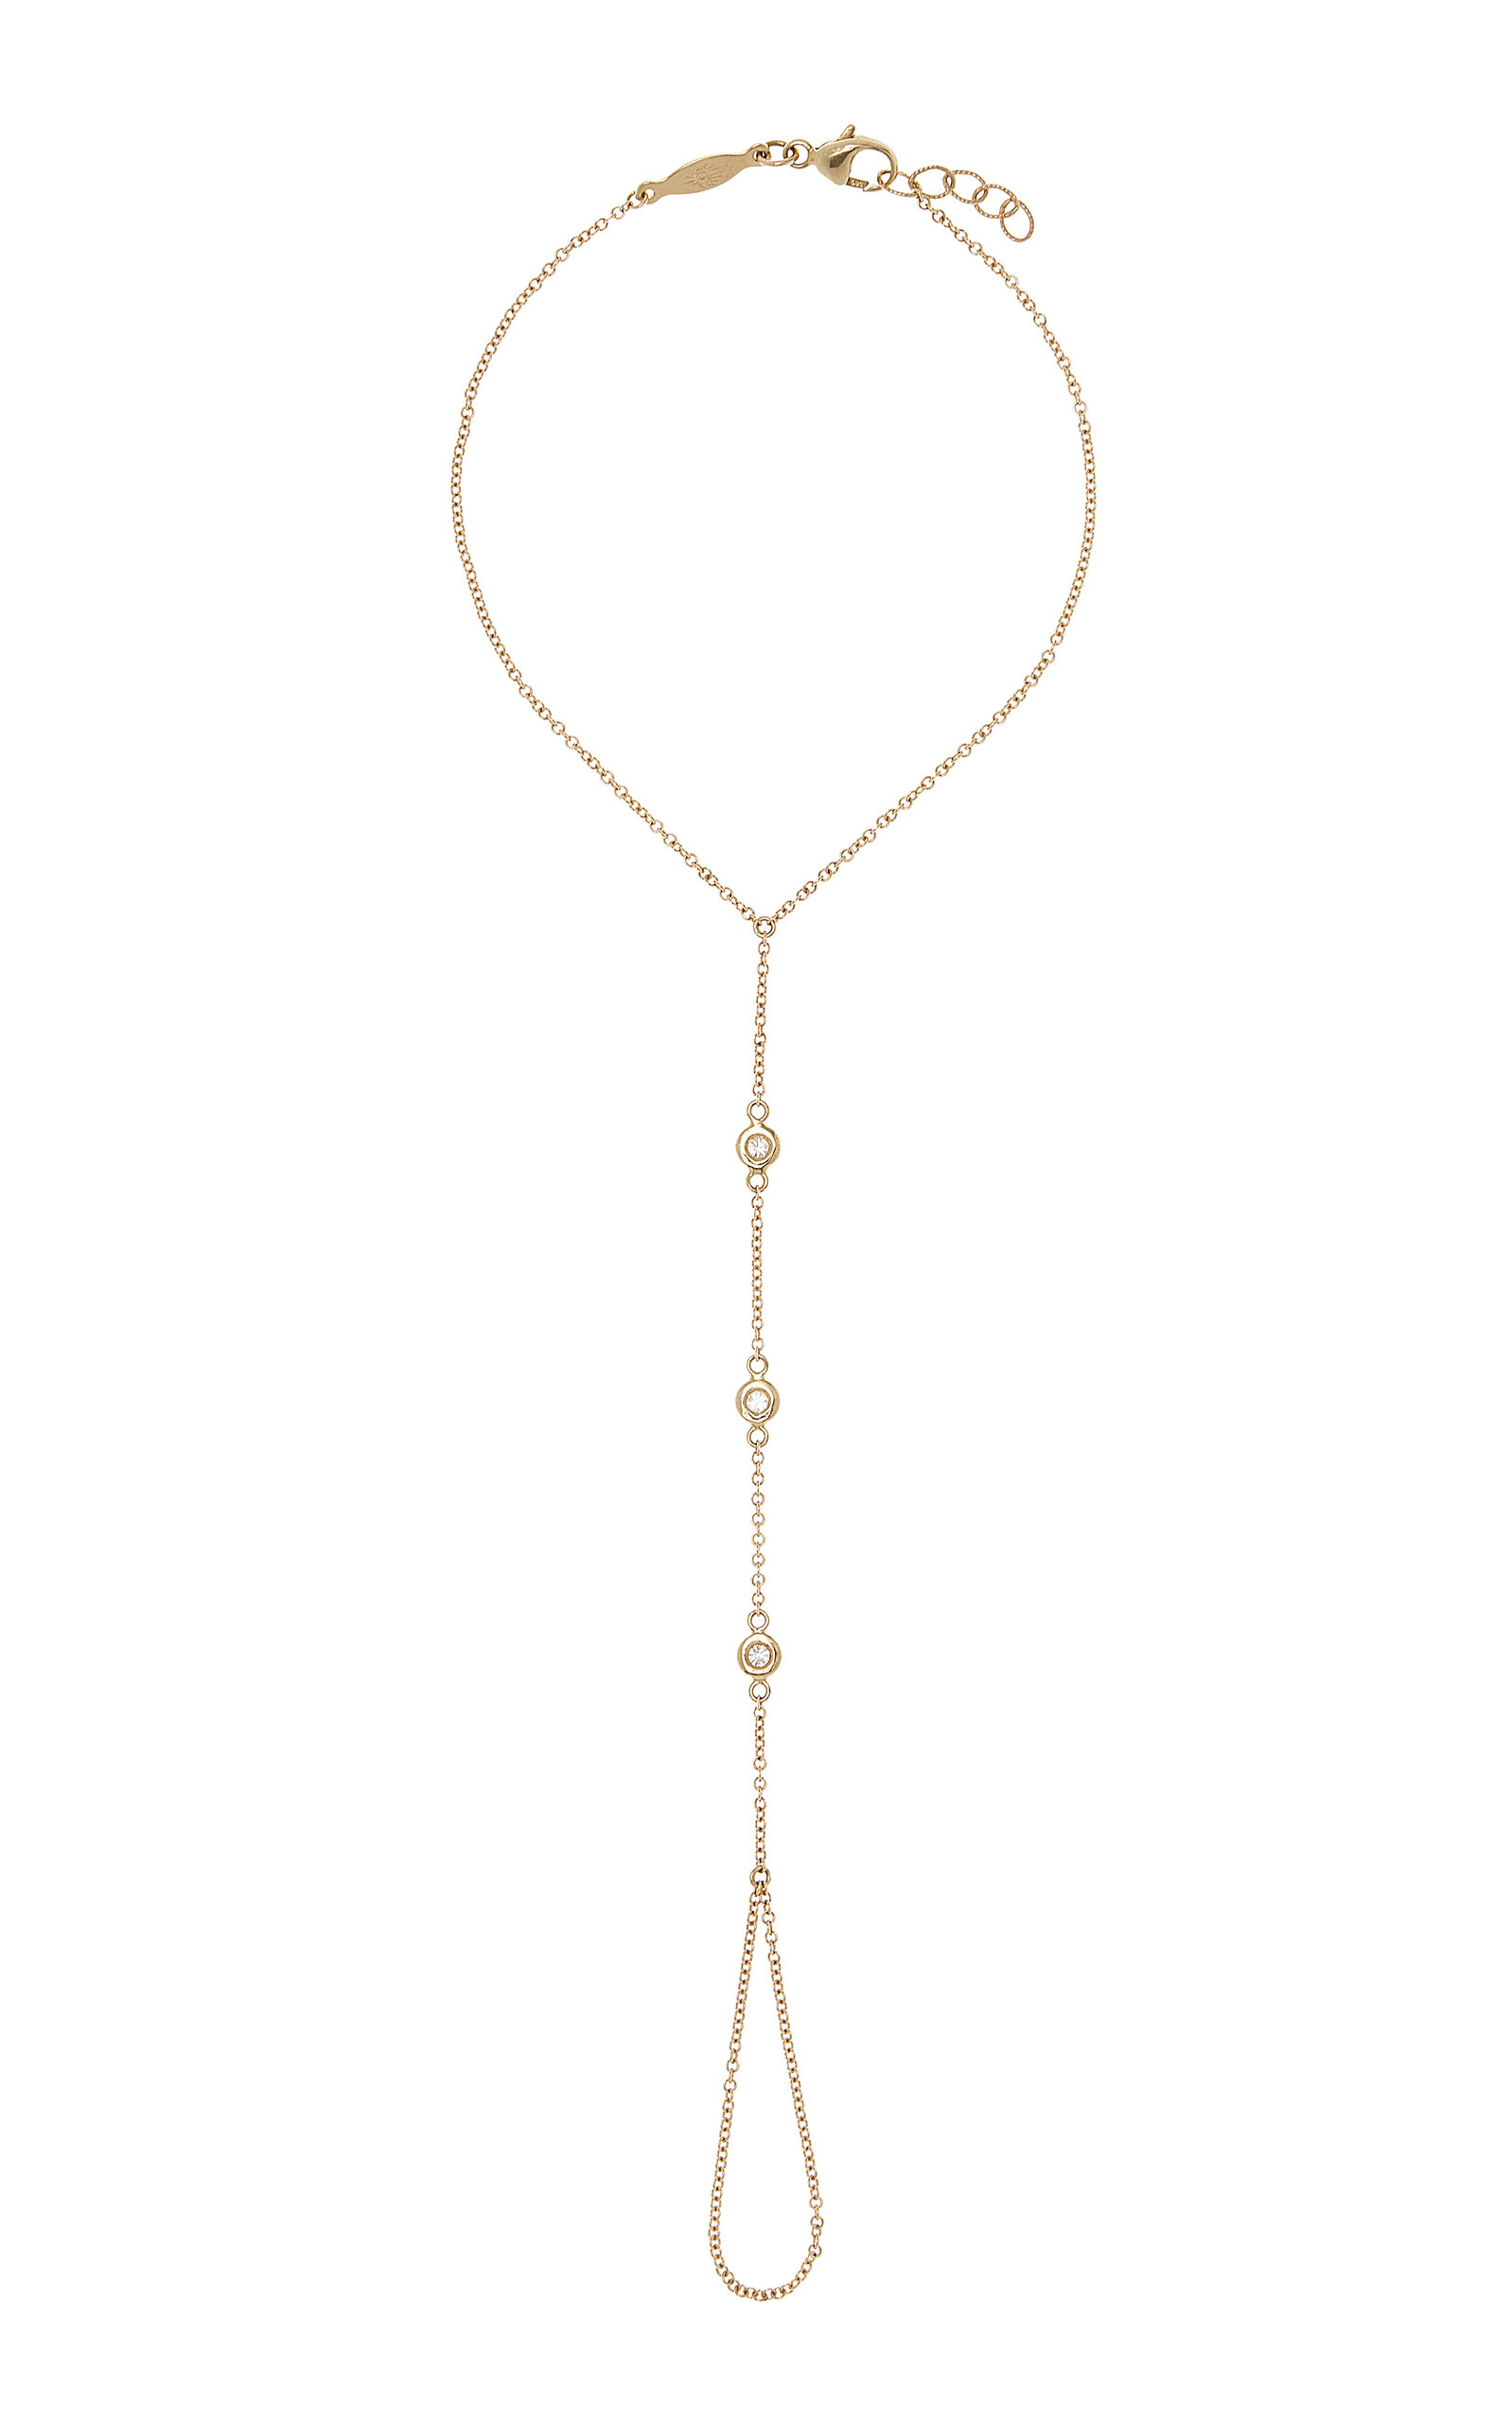 Jacquie Aiche Spaced Out 14k Yellow Gold Diamond Hand Chain